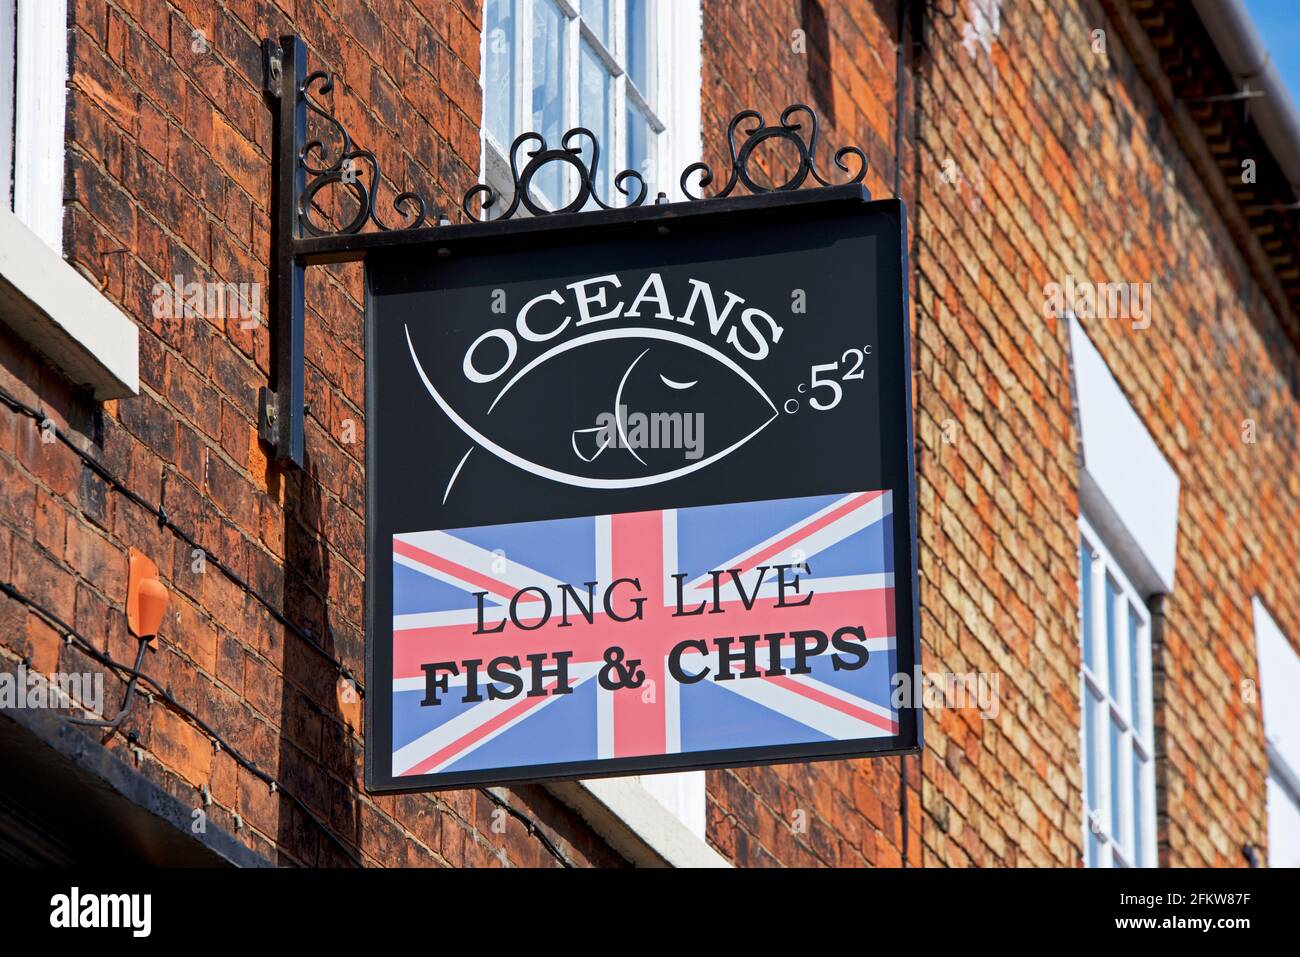 Sign - long live fish & chips - above fish & chip shop, England UK Stock Photo